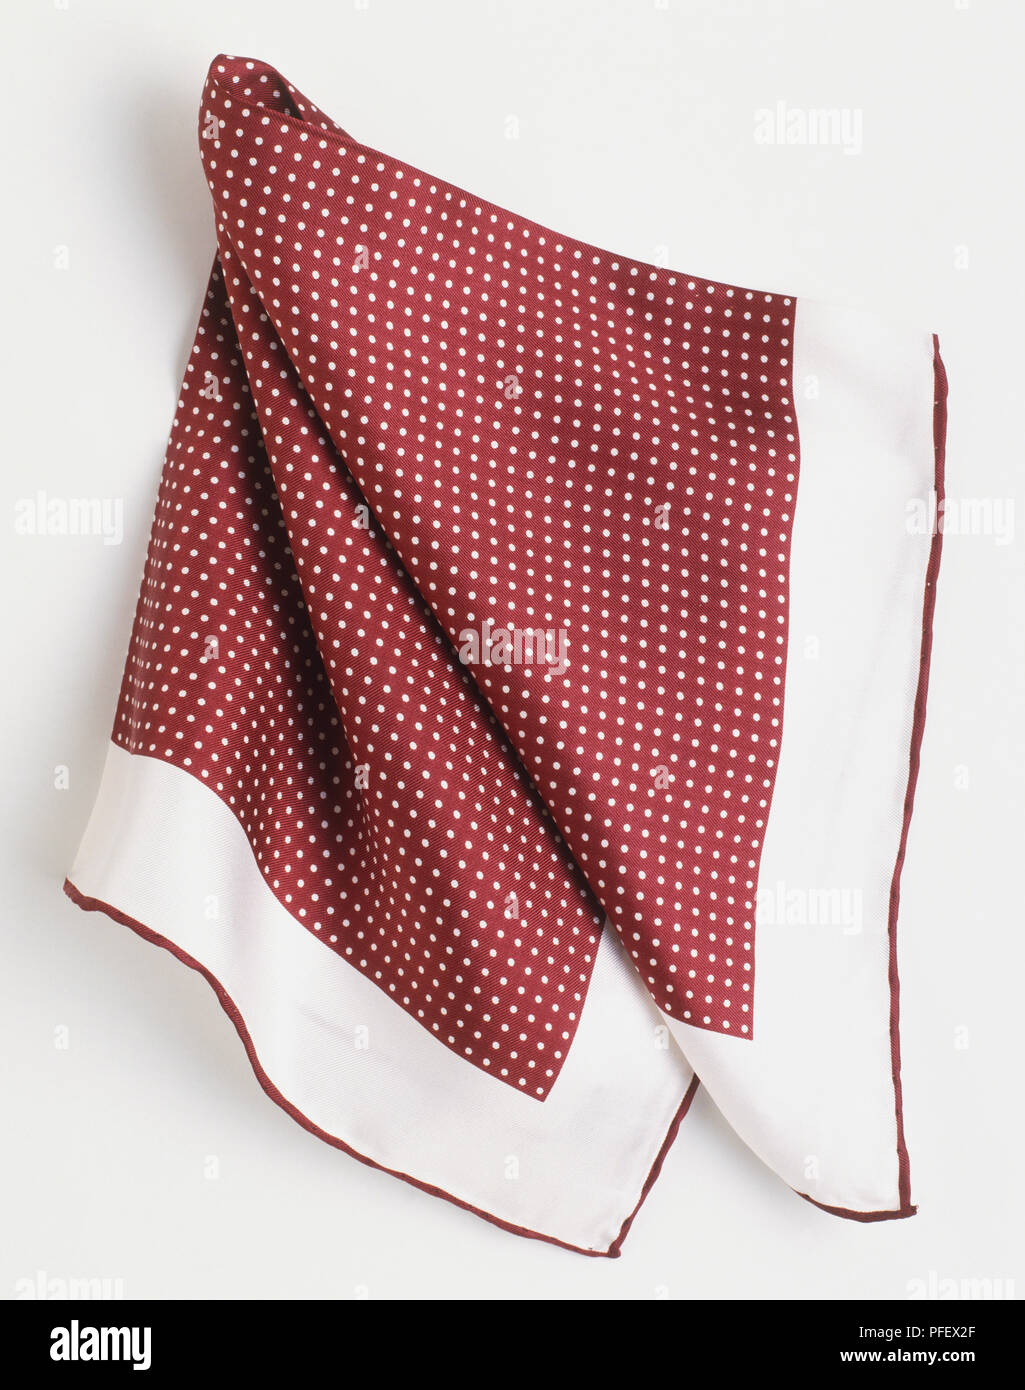 Folded red handkerchief with white border and polka dot pattern, close up Stock Photo